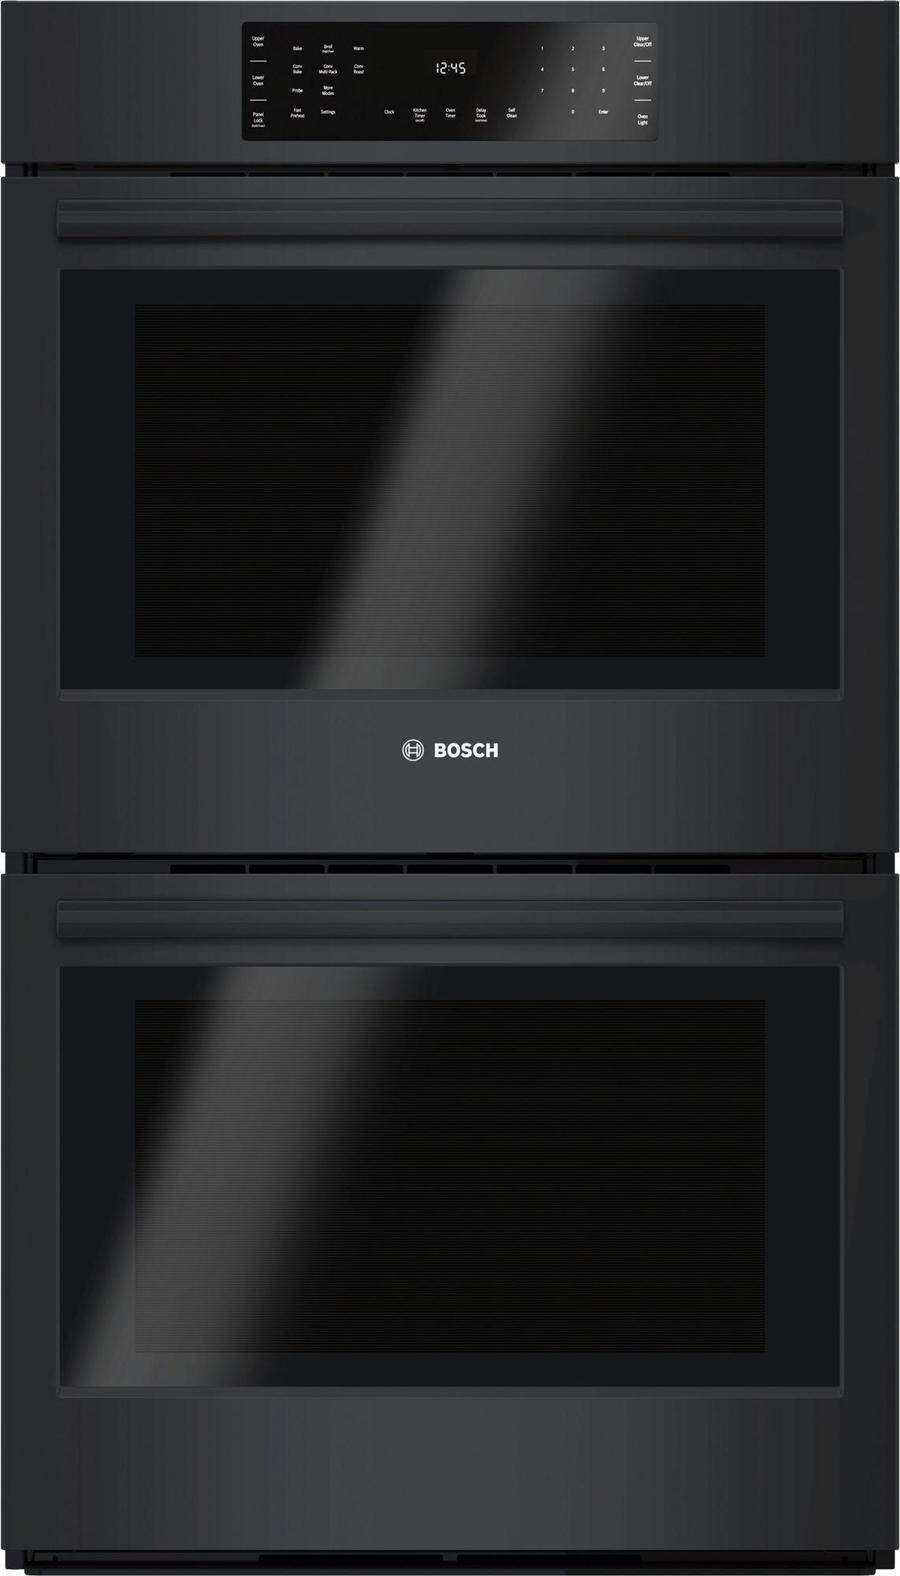 Bosch - 4.6 cu. ft Double Wall Oven in Black - HBL8661UC